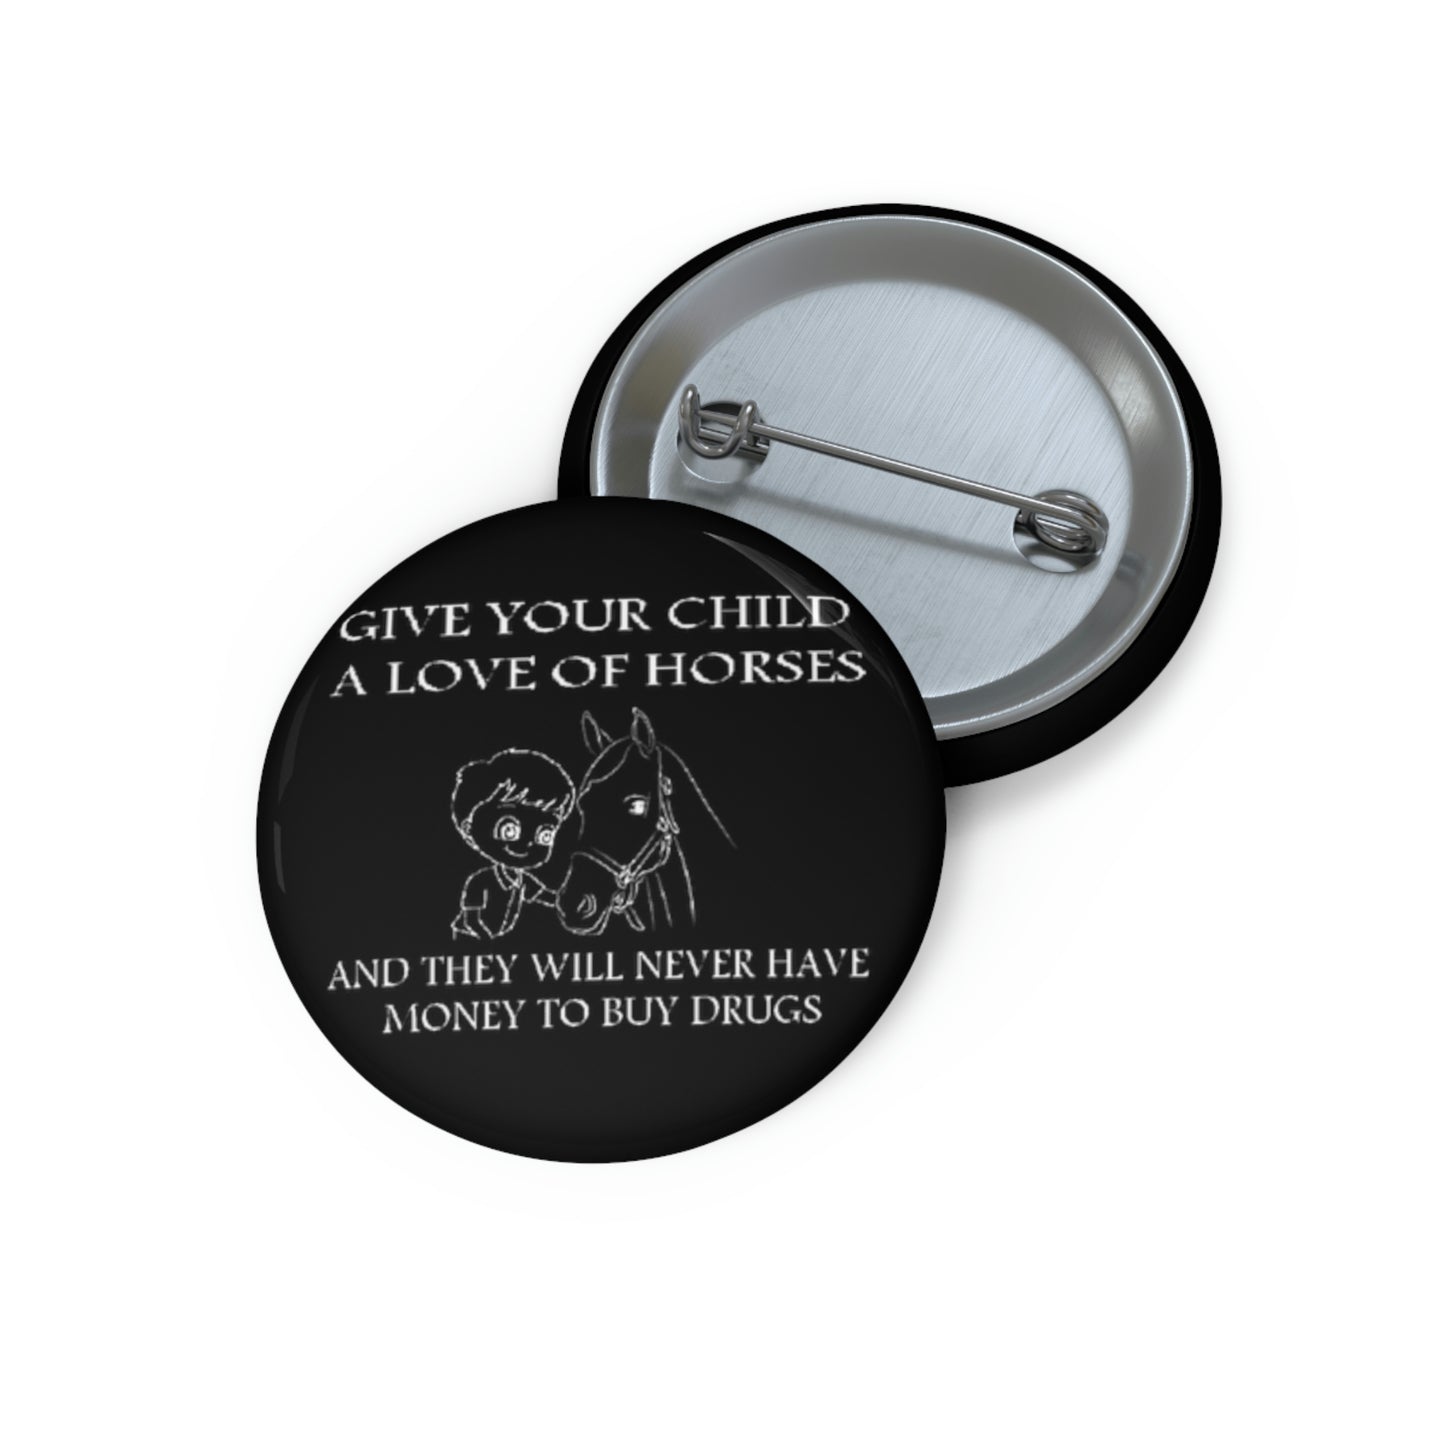 Say NO to Drugs - Custom Pin Buttons - Black